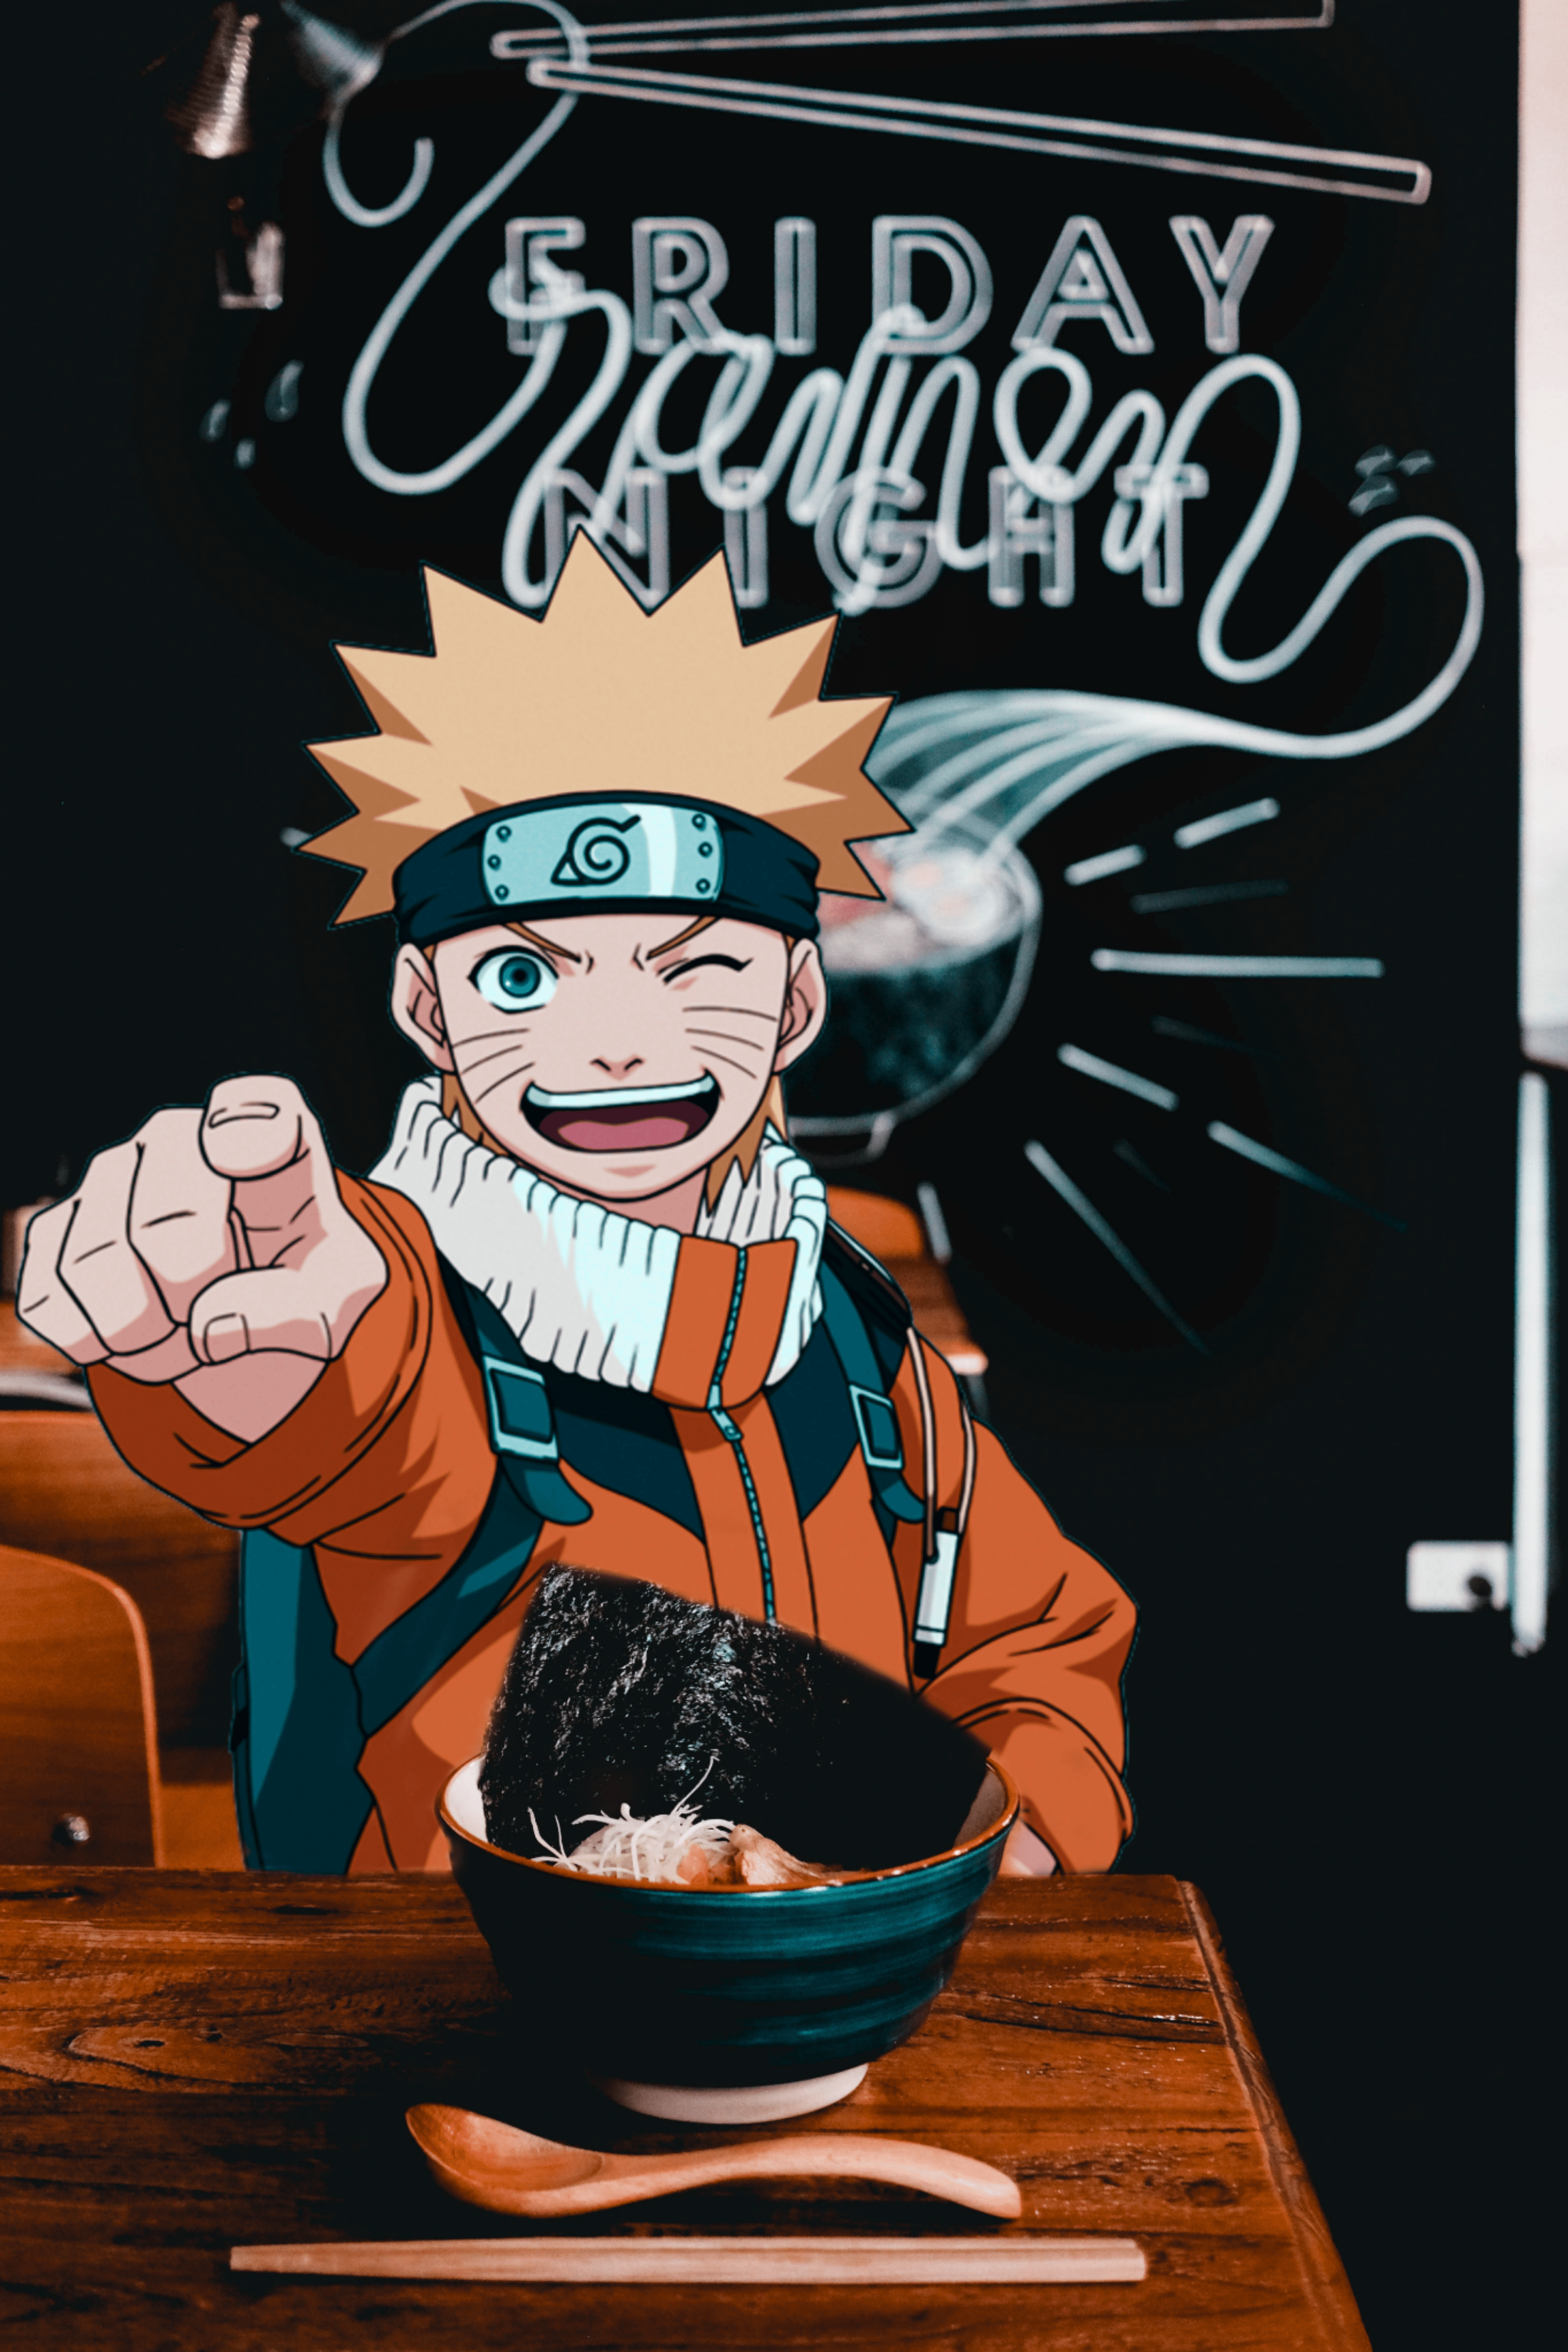 Ichiraku Ramen in real life and Naruto. My project is Anime Characters in Reverse Isekai. Hope you'll enjoy it!